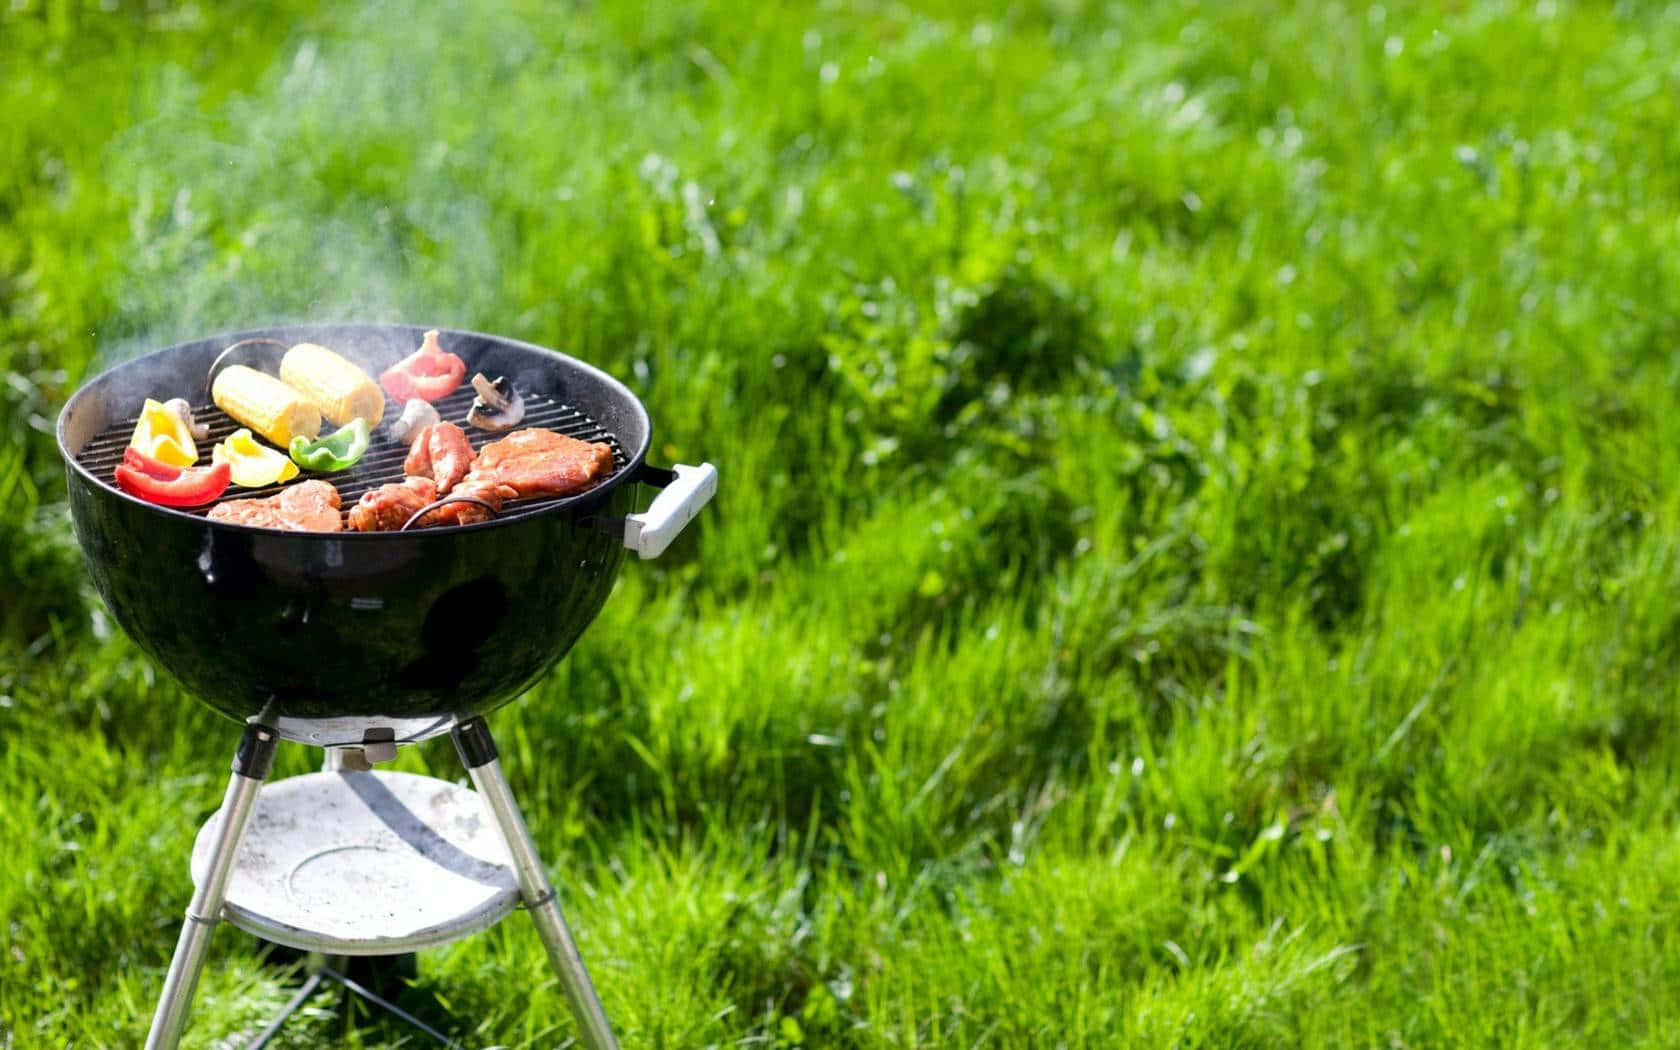 Enjoy the perfect summer day with a BBQ